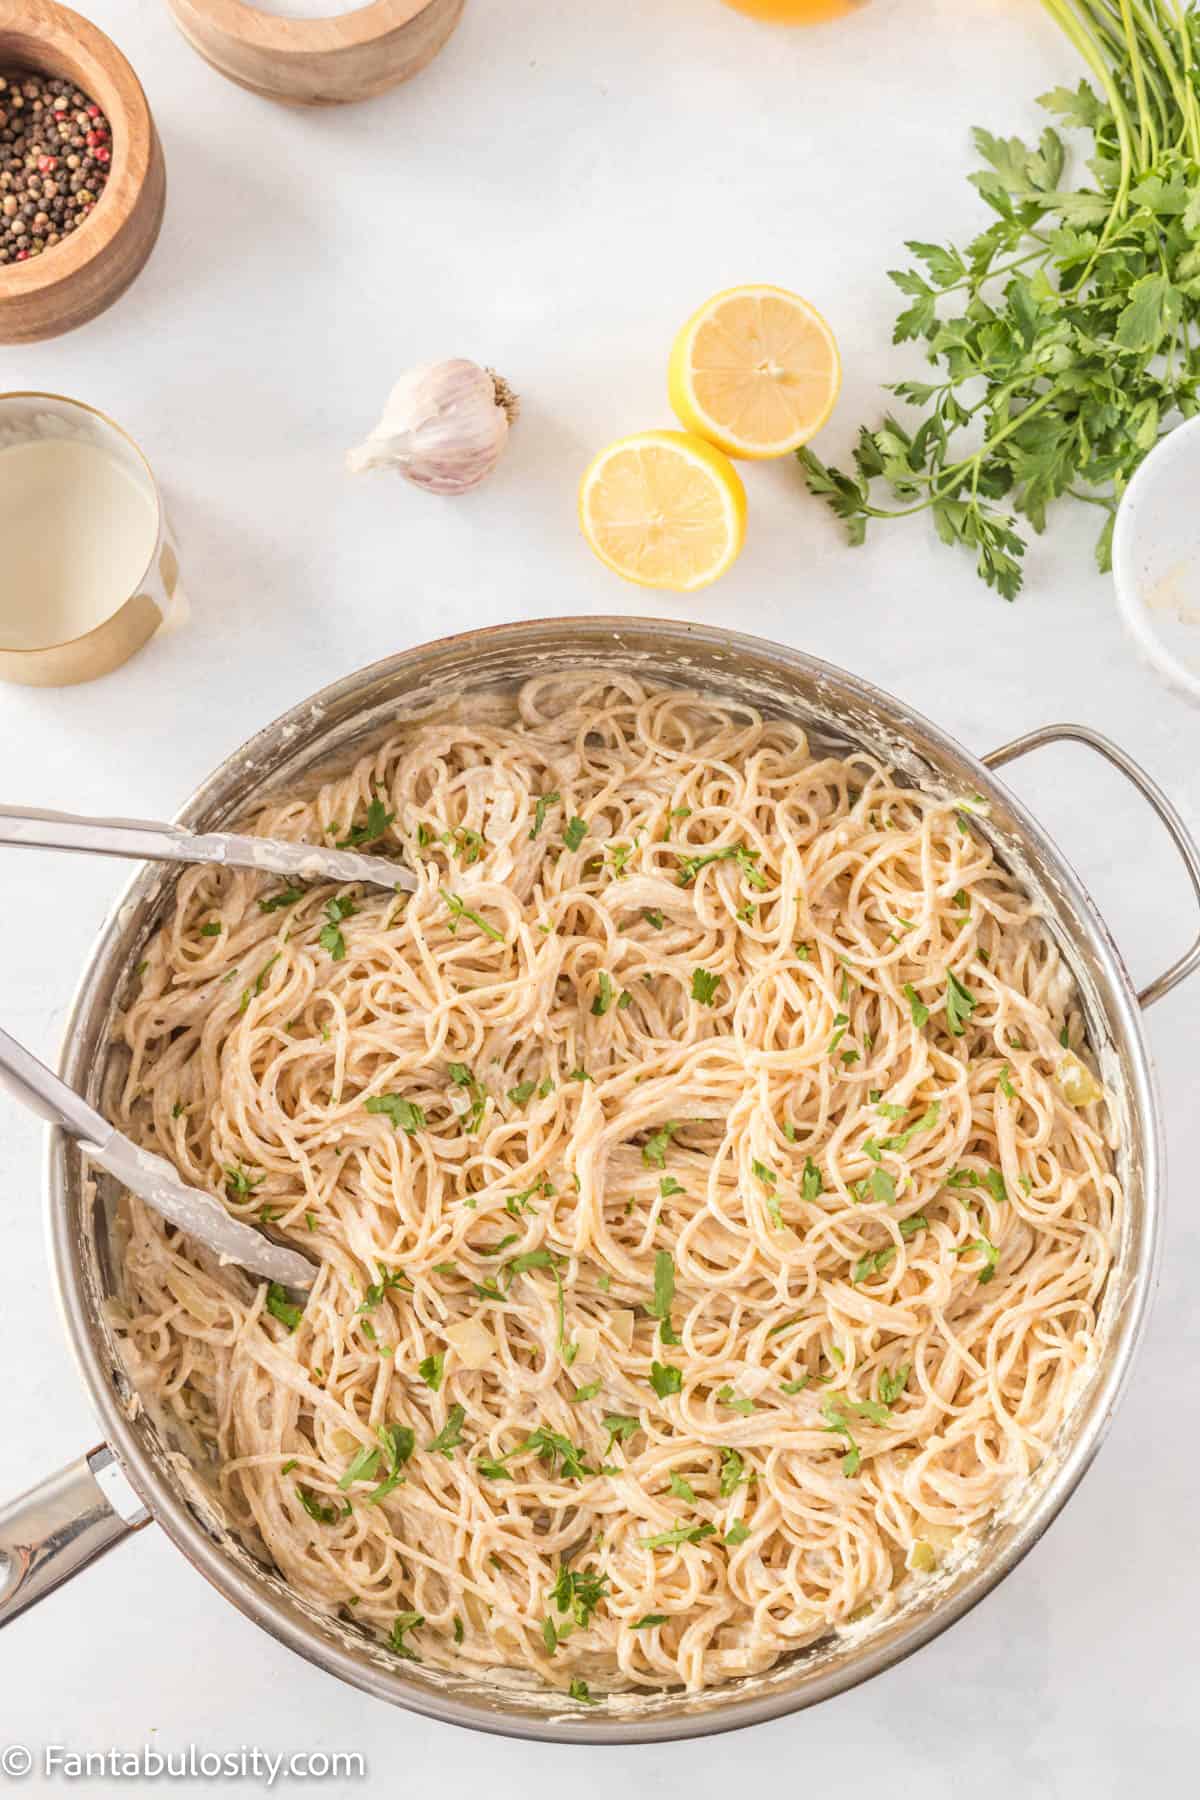 Cooked spaghetti noodles for Creamy Lemon Chicken Pasta have been stirred into the creamy sauce and then topped with parsley